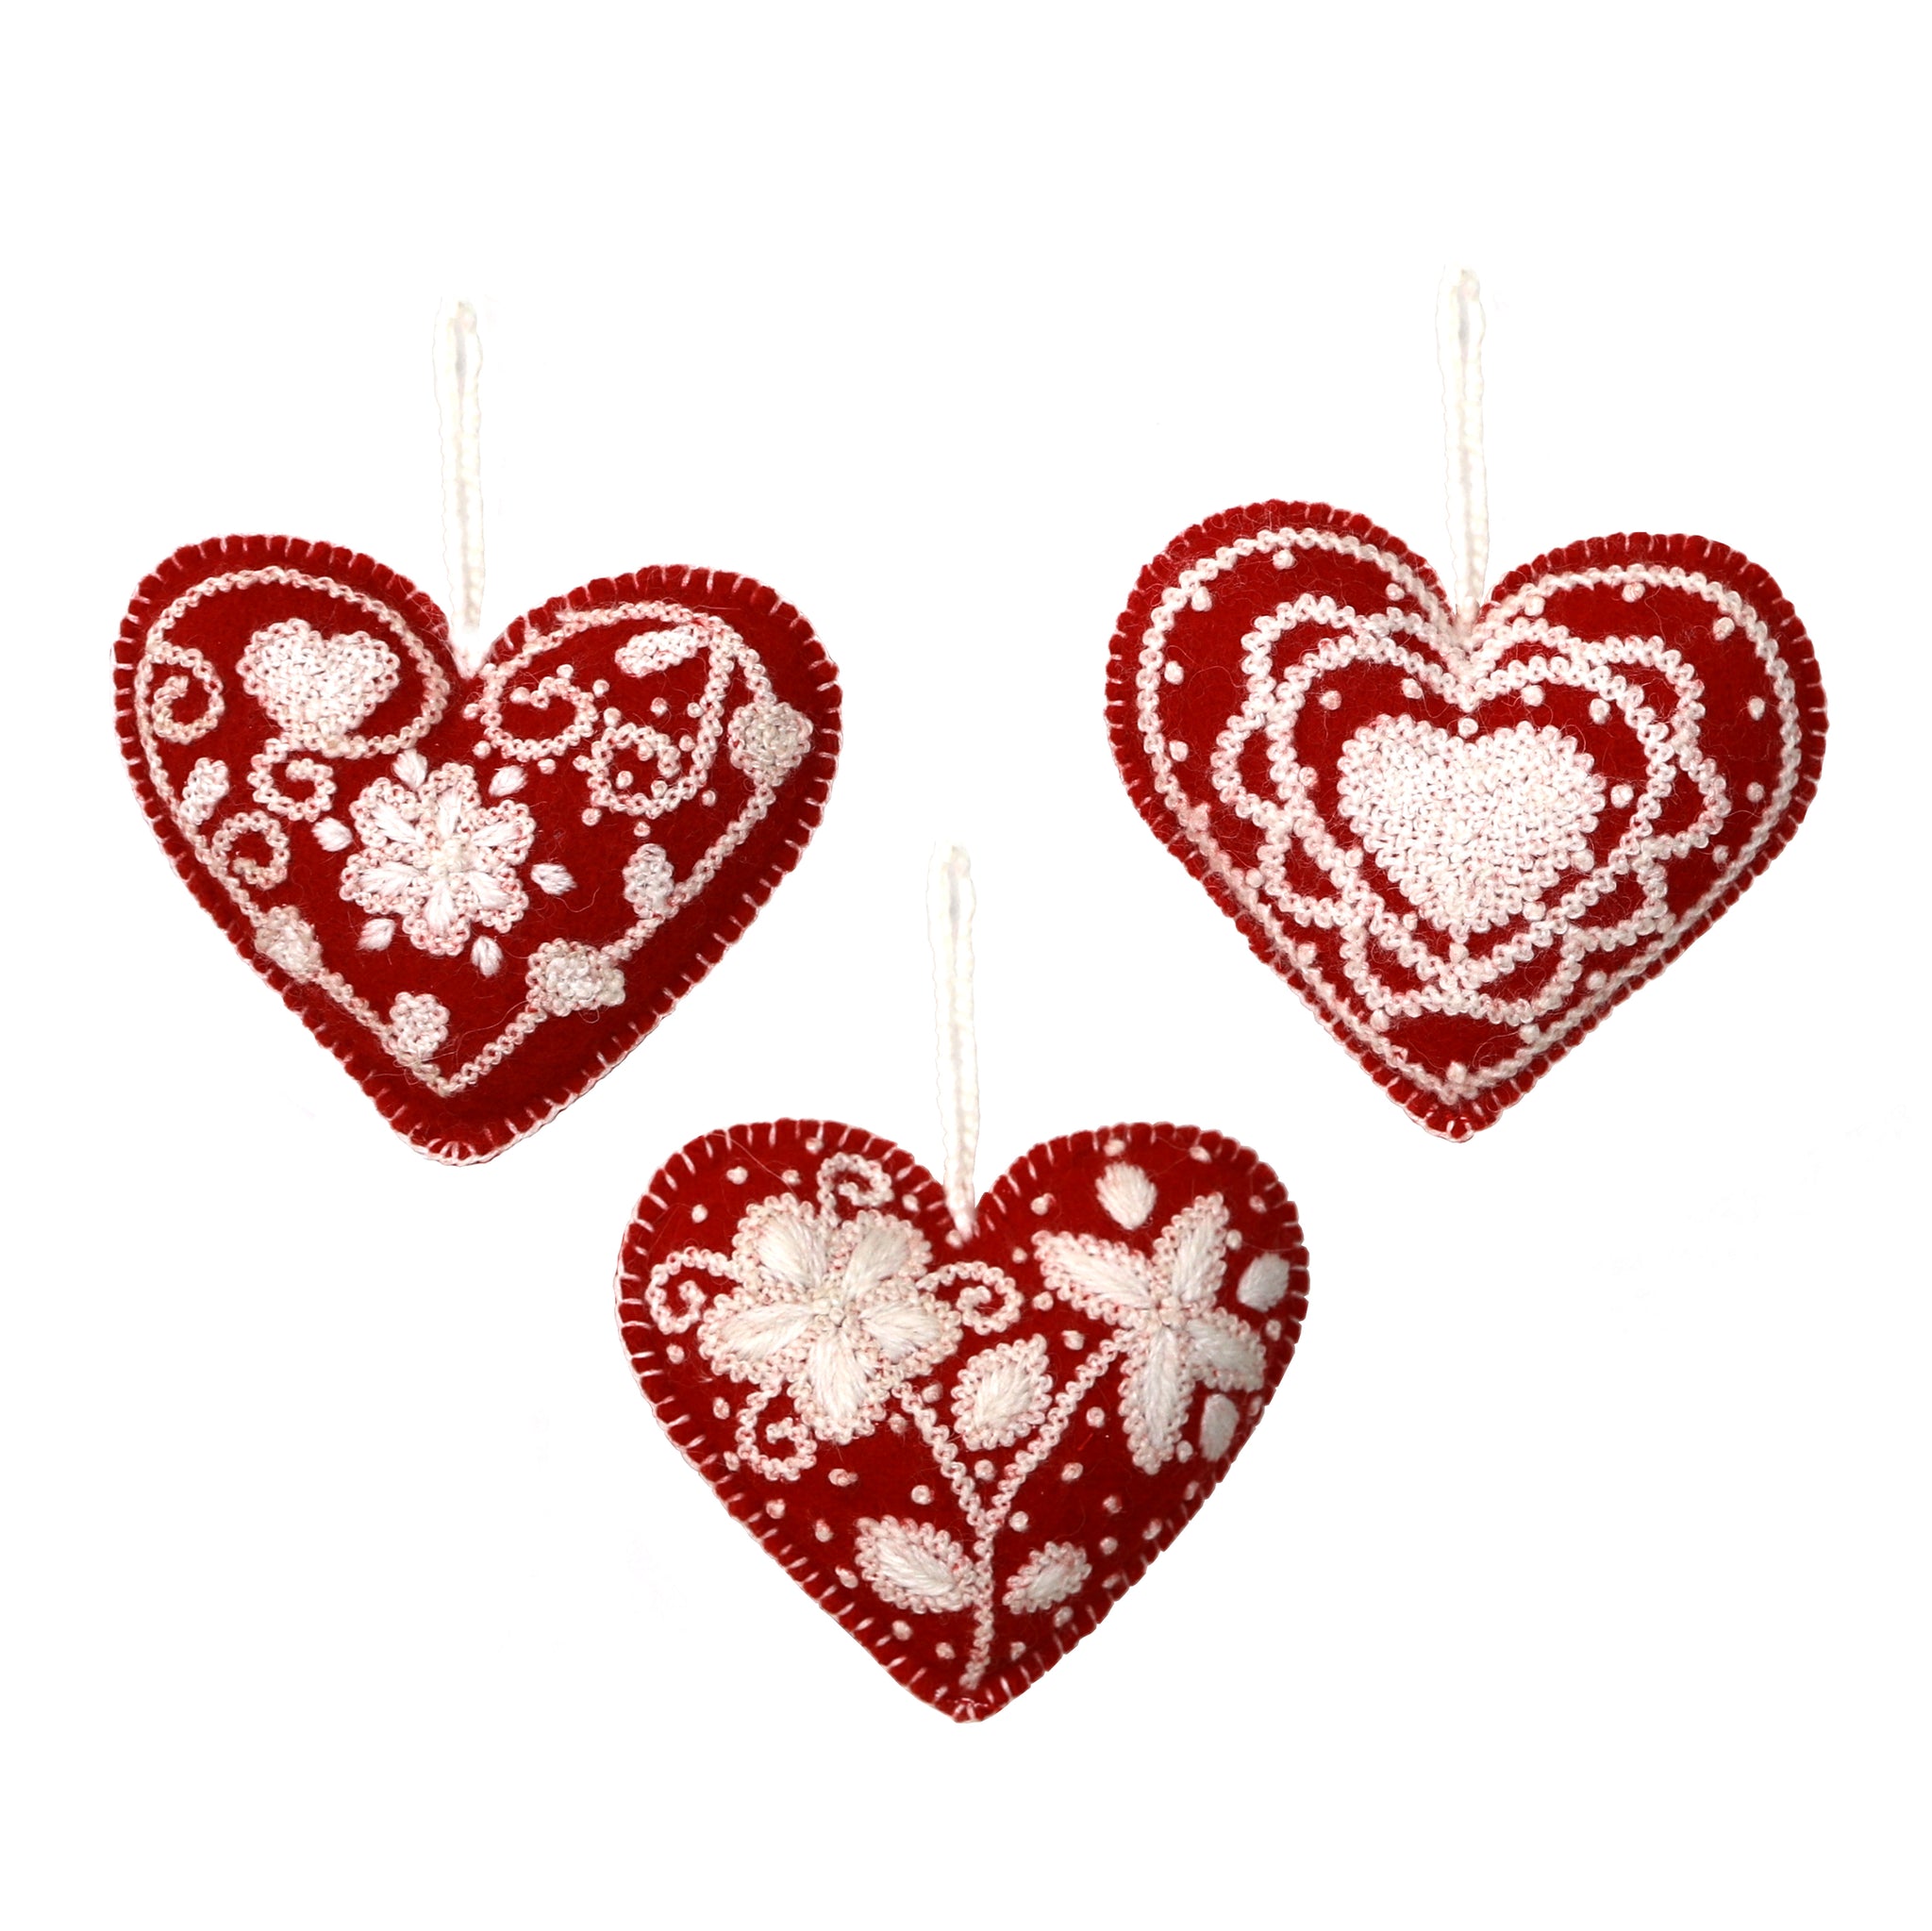 Embroidered Heart Ornaments - set of 3